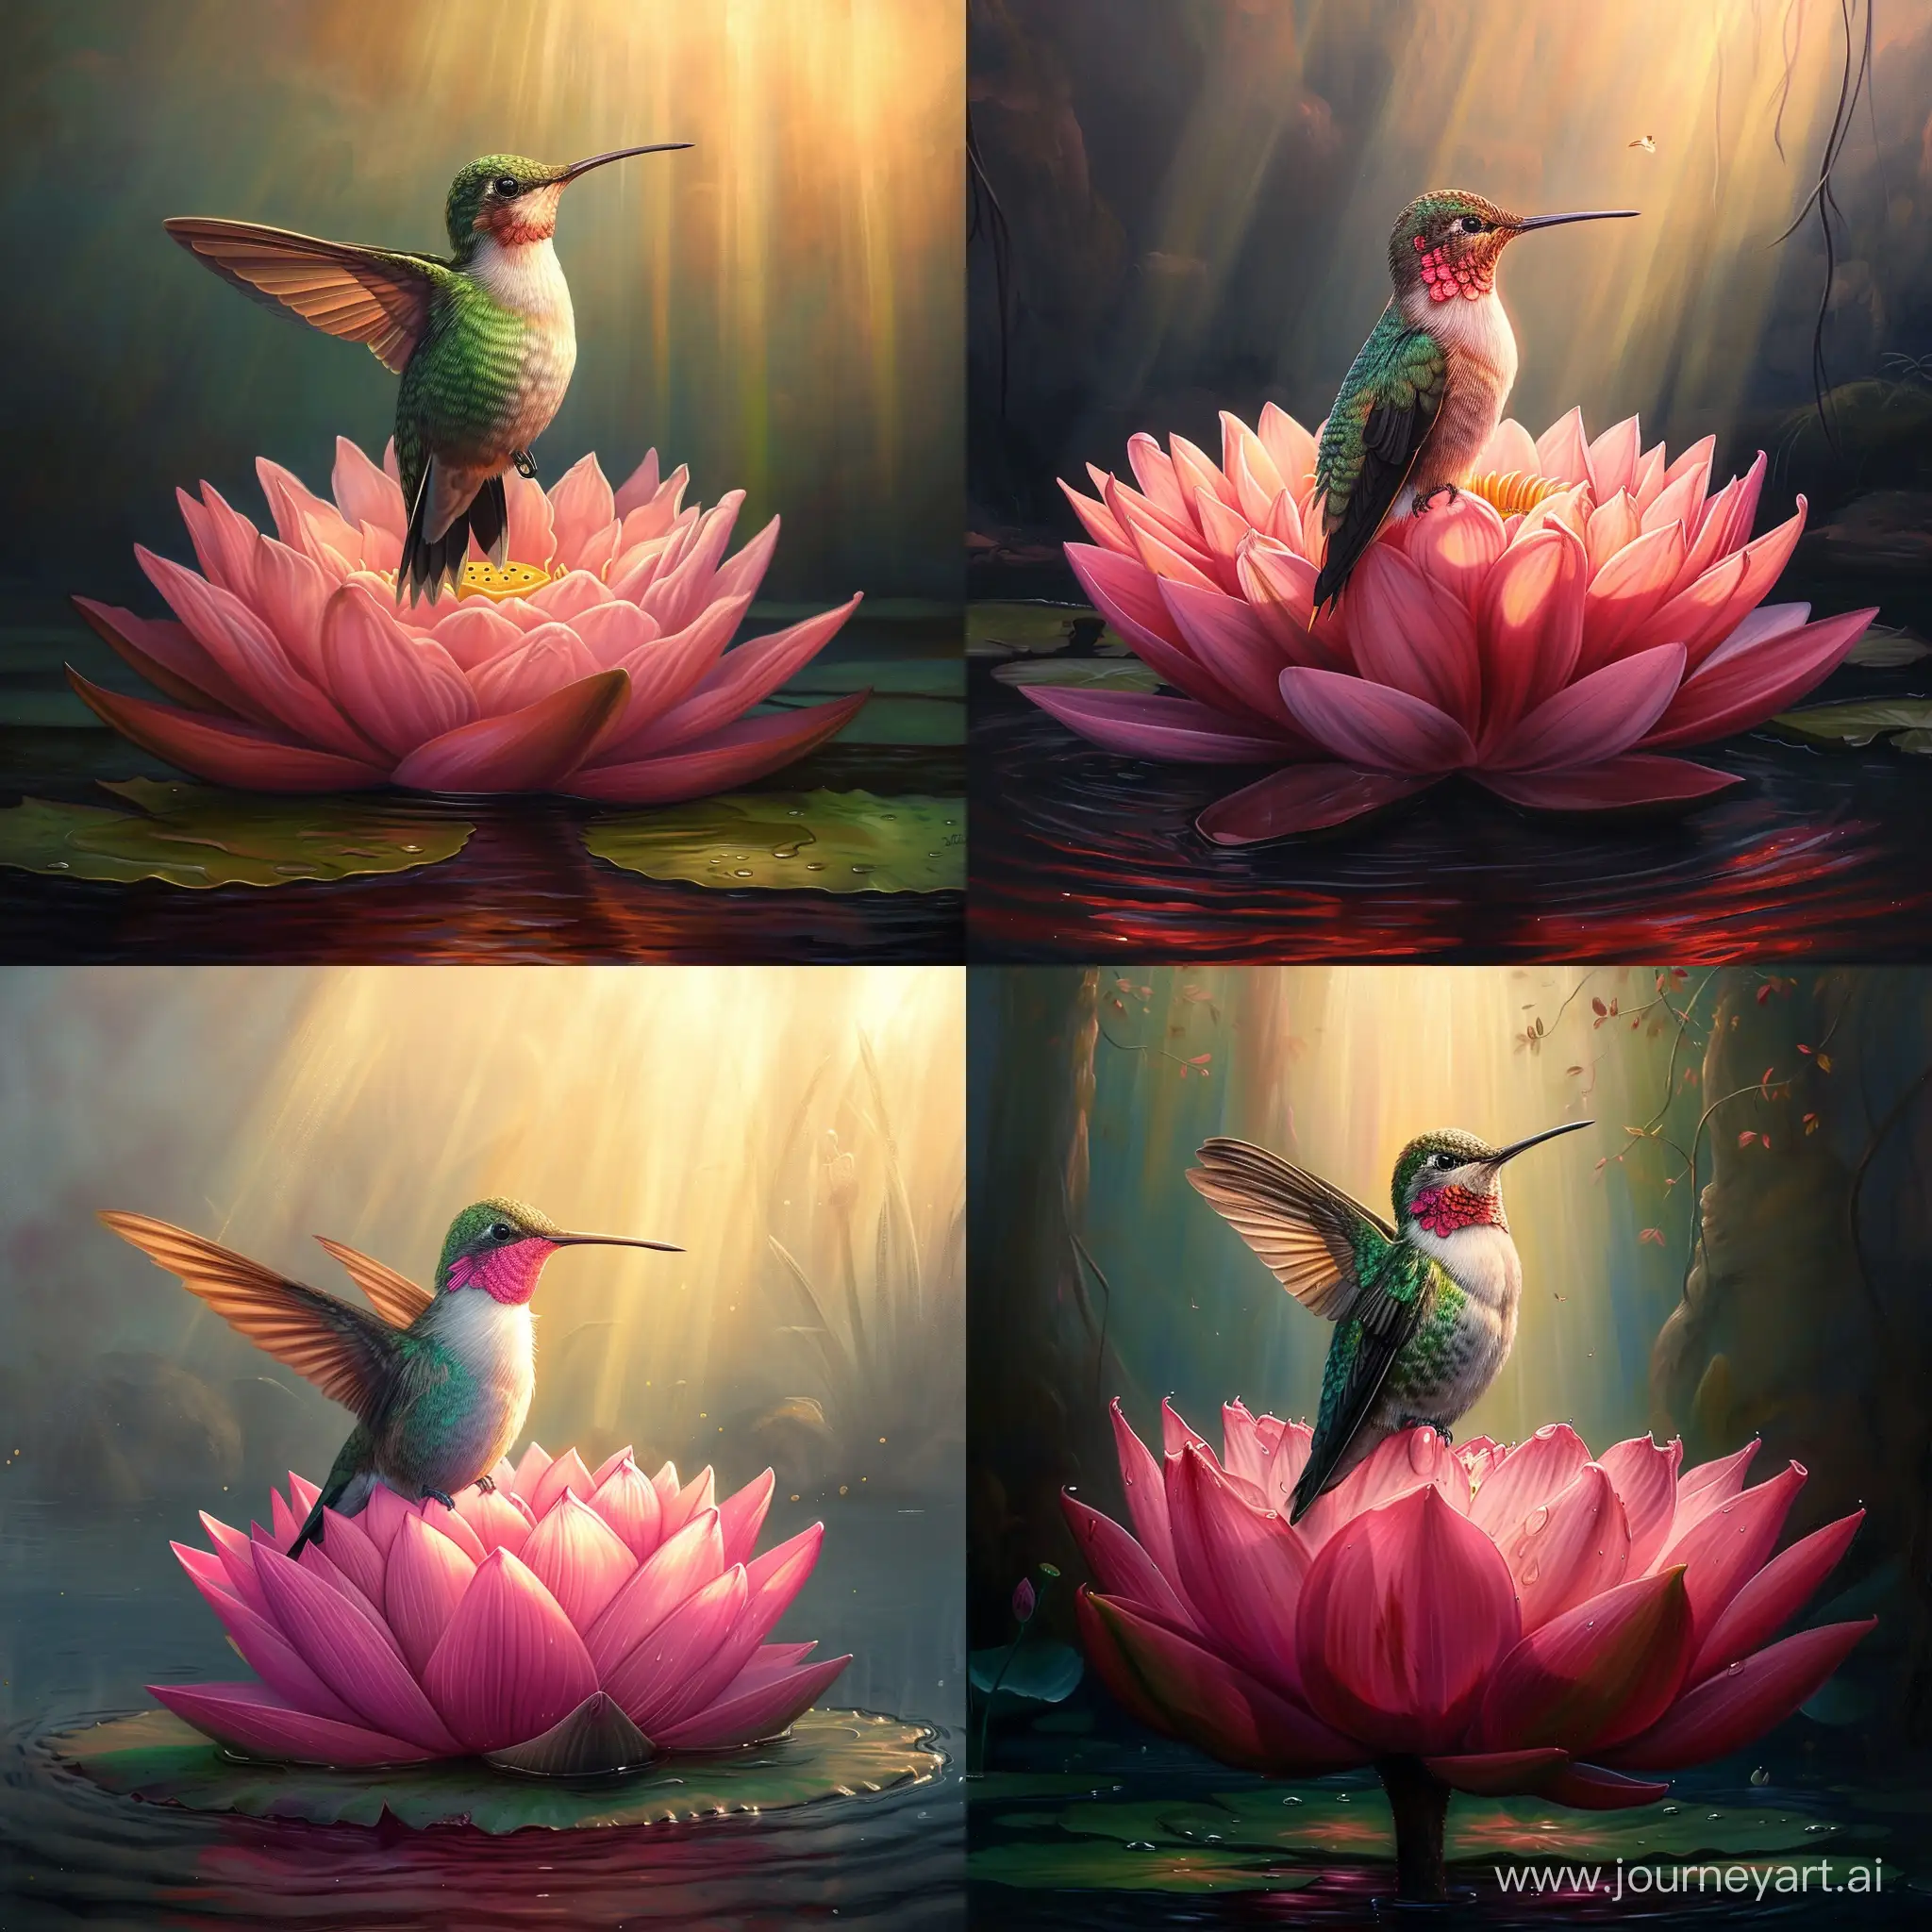 hummingbird sitting on a huge pink lotus in the middle of a pond, vibrant colours, highly detailed, serene atmosphere. Soft sunlight gracefully illuminates the subject's body and feathers, casting a dreamlike glow.